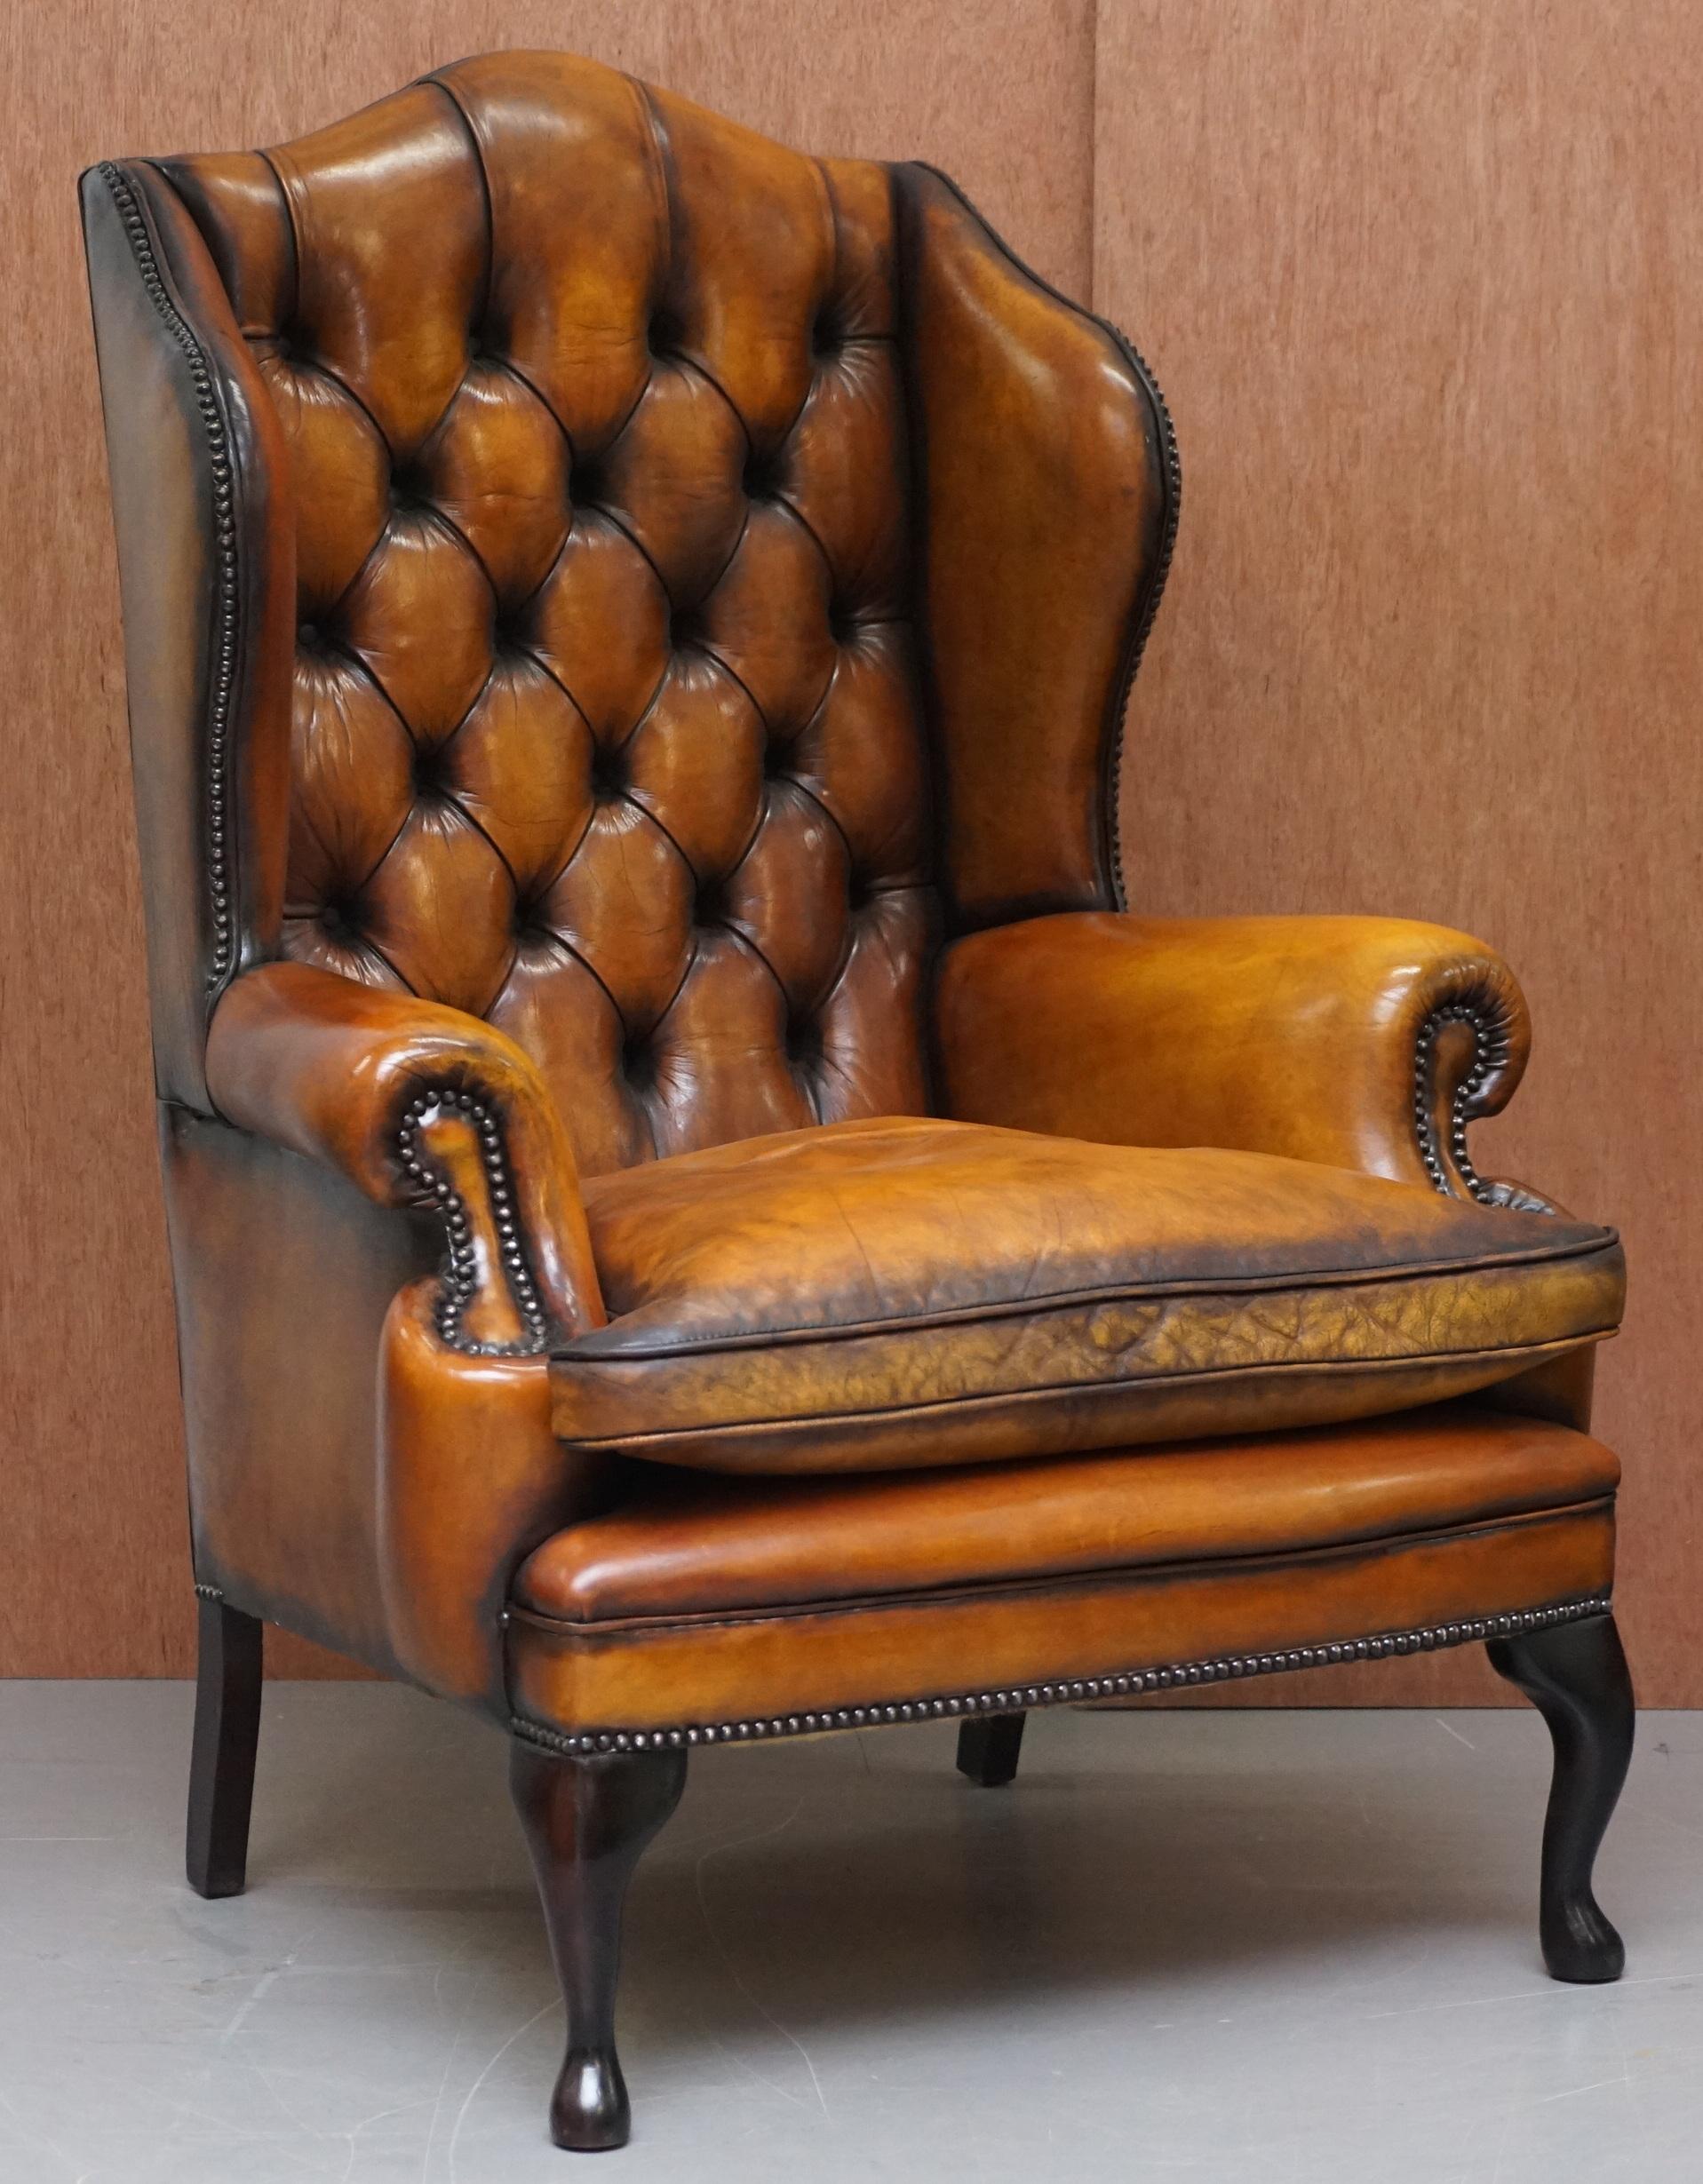 We are delighted to offer for sale this stunning pair of William Morris style chesterfield fully restored vintage wingback armchairs in Whisky brown leather with thick heavy feather filled cushions

A good looking and comfortable pair of coil